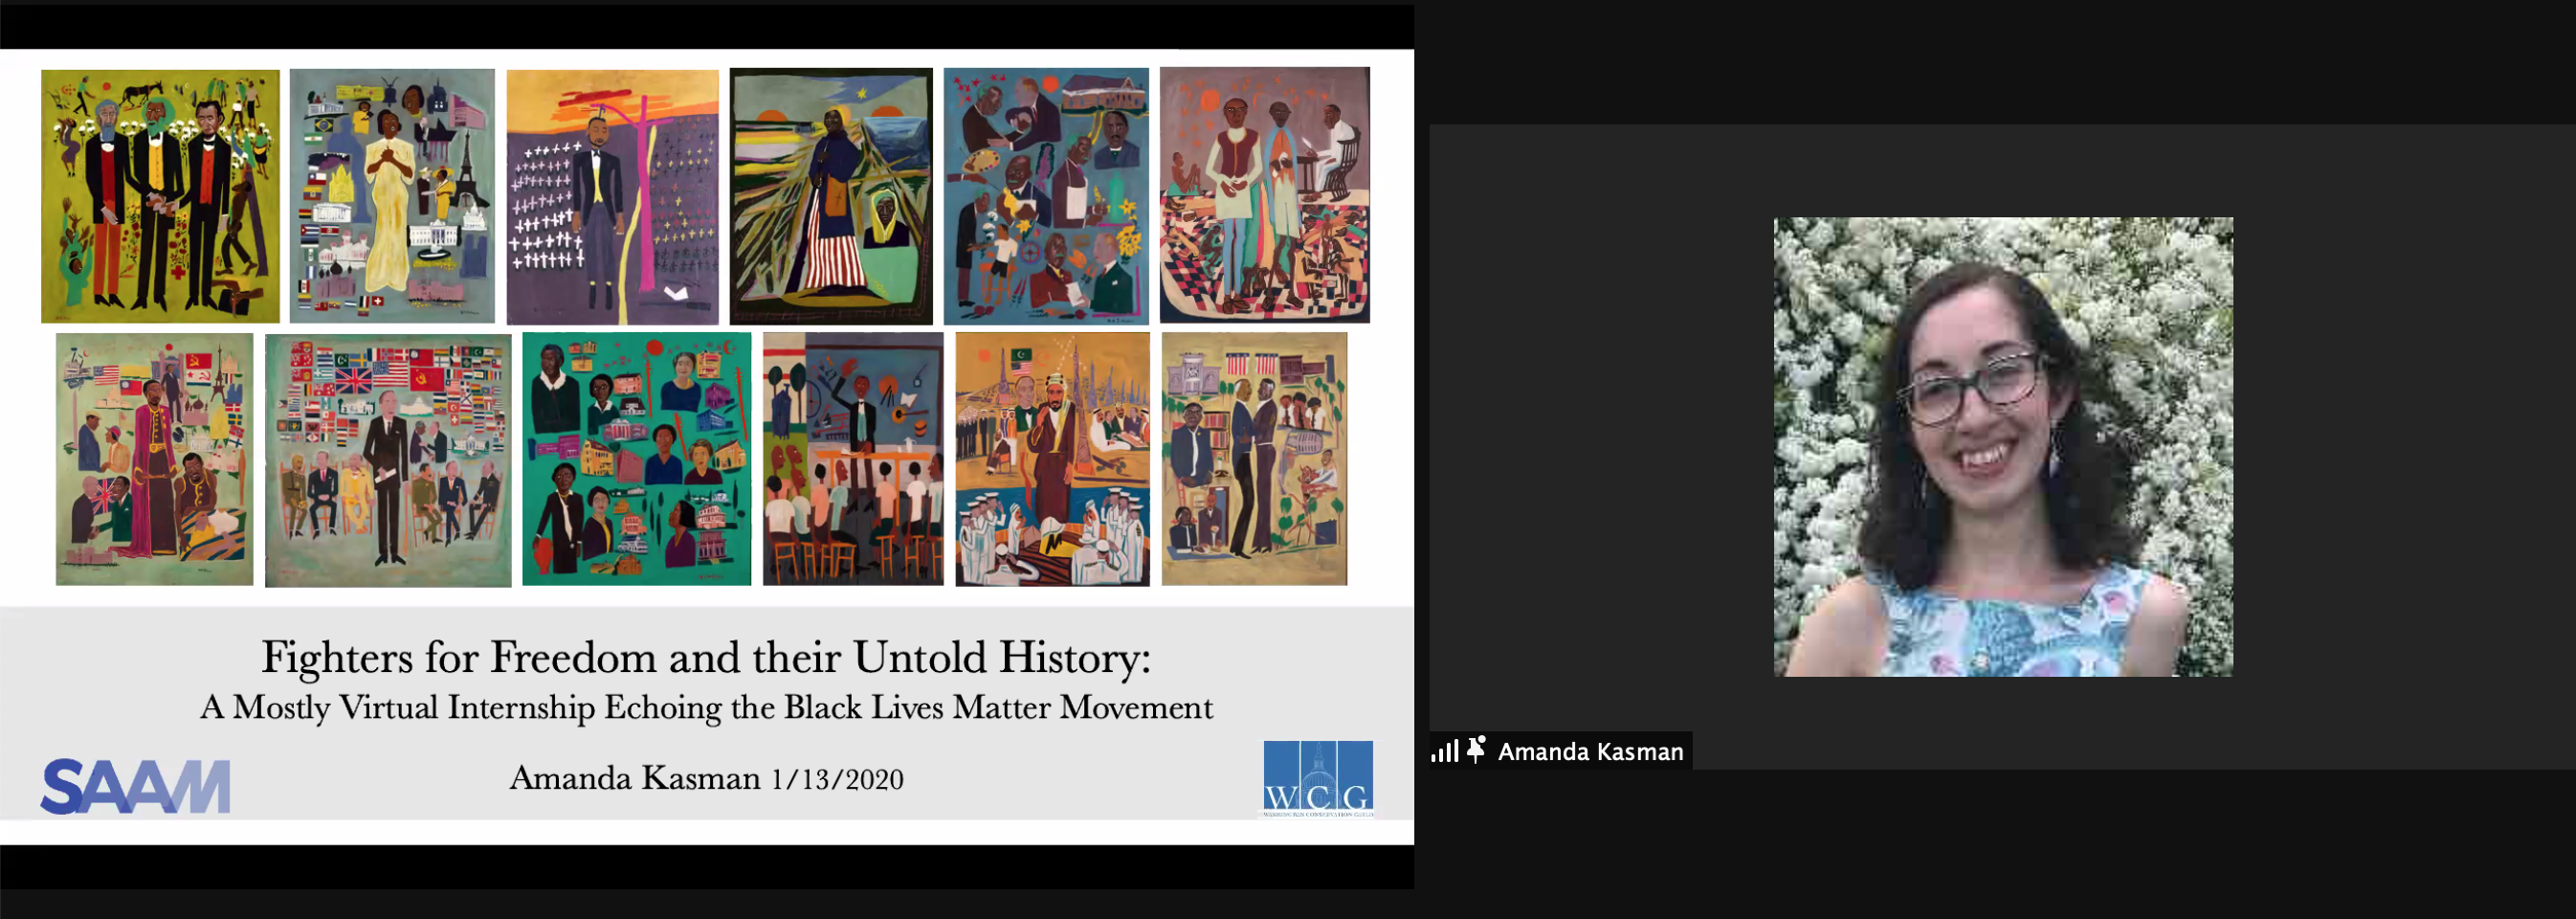 Screenshot of a virtual presentation with twelve colorful paintings featuring BIPOC figures, busts, and scenes